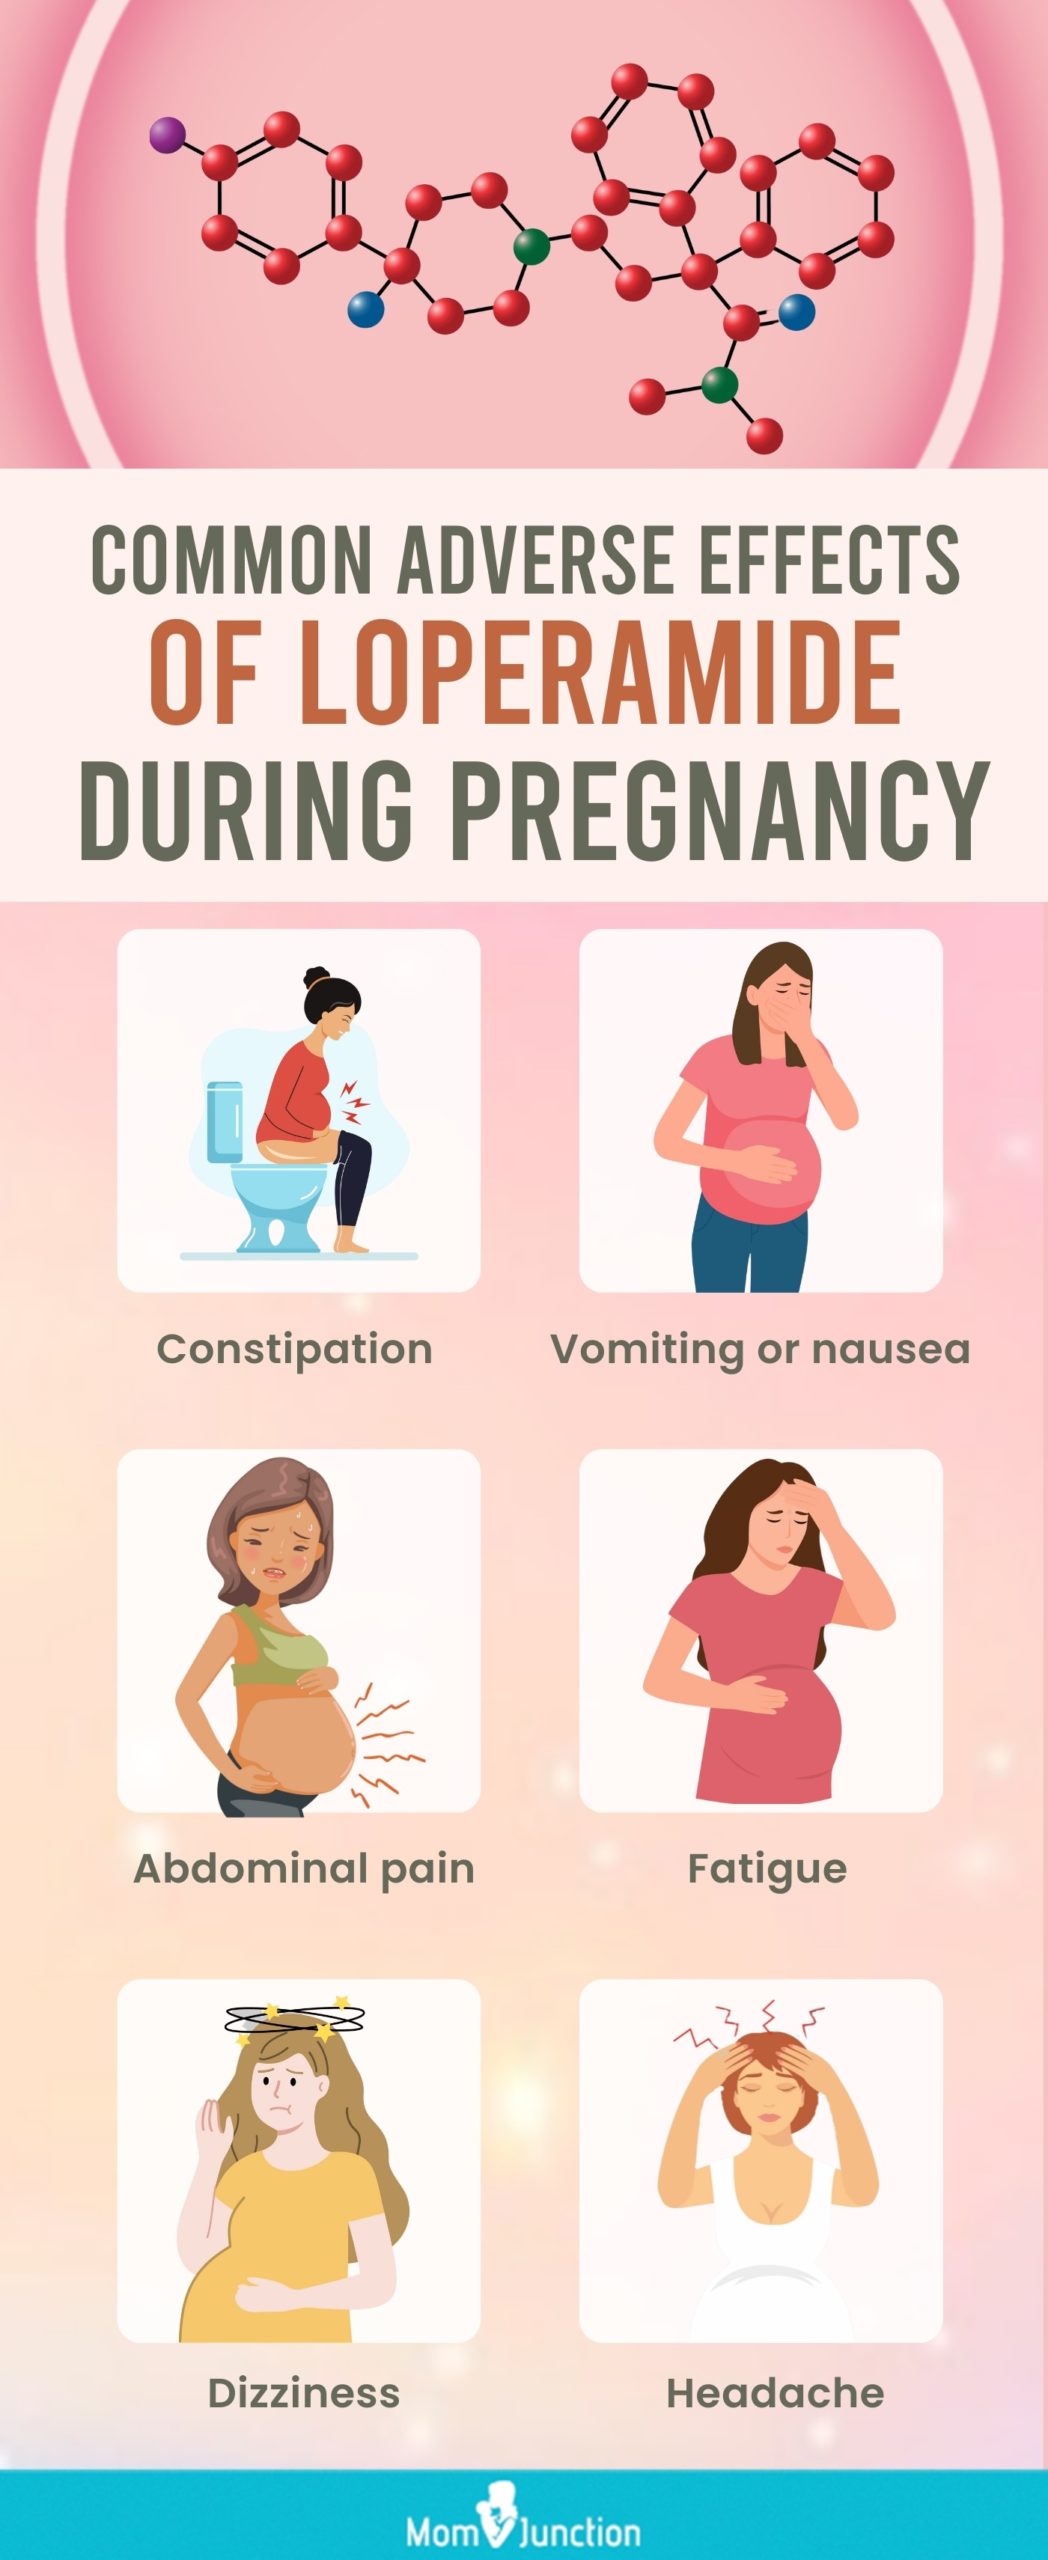 common adverse effects of loperamide during pregnancy (infographic)